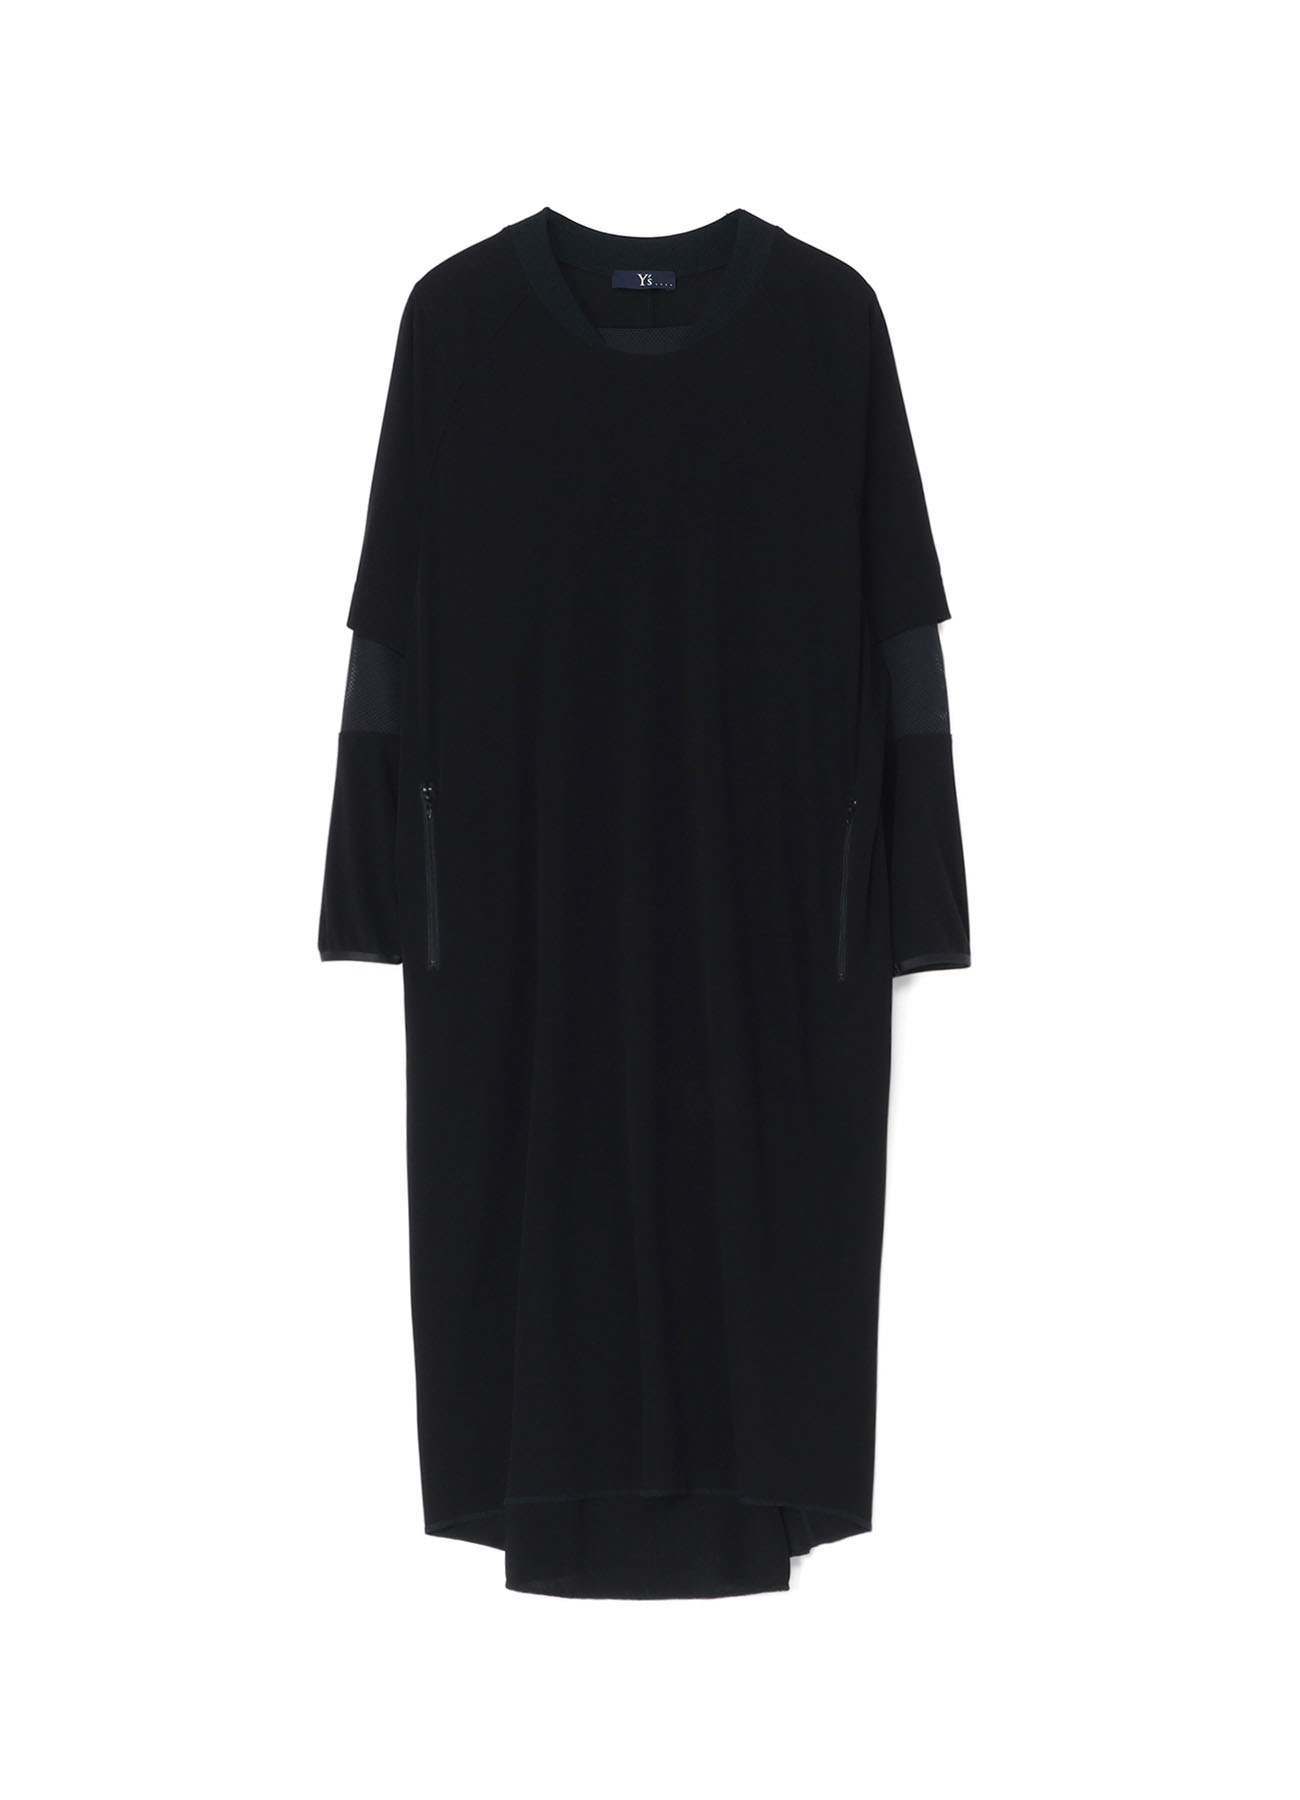 TRIACETATE/POLYESTER PANELLED JERSEY DRESS